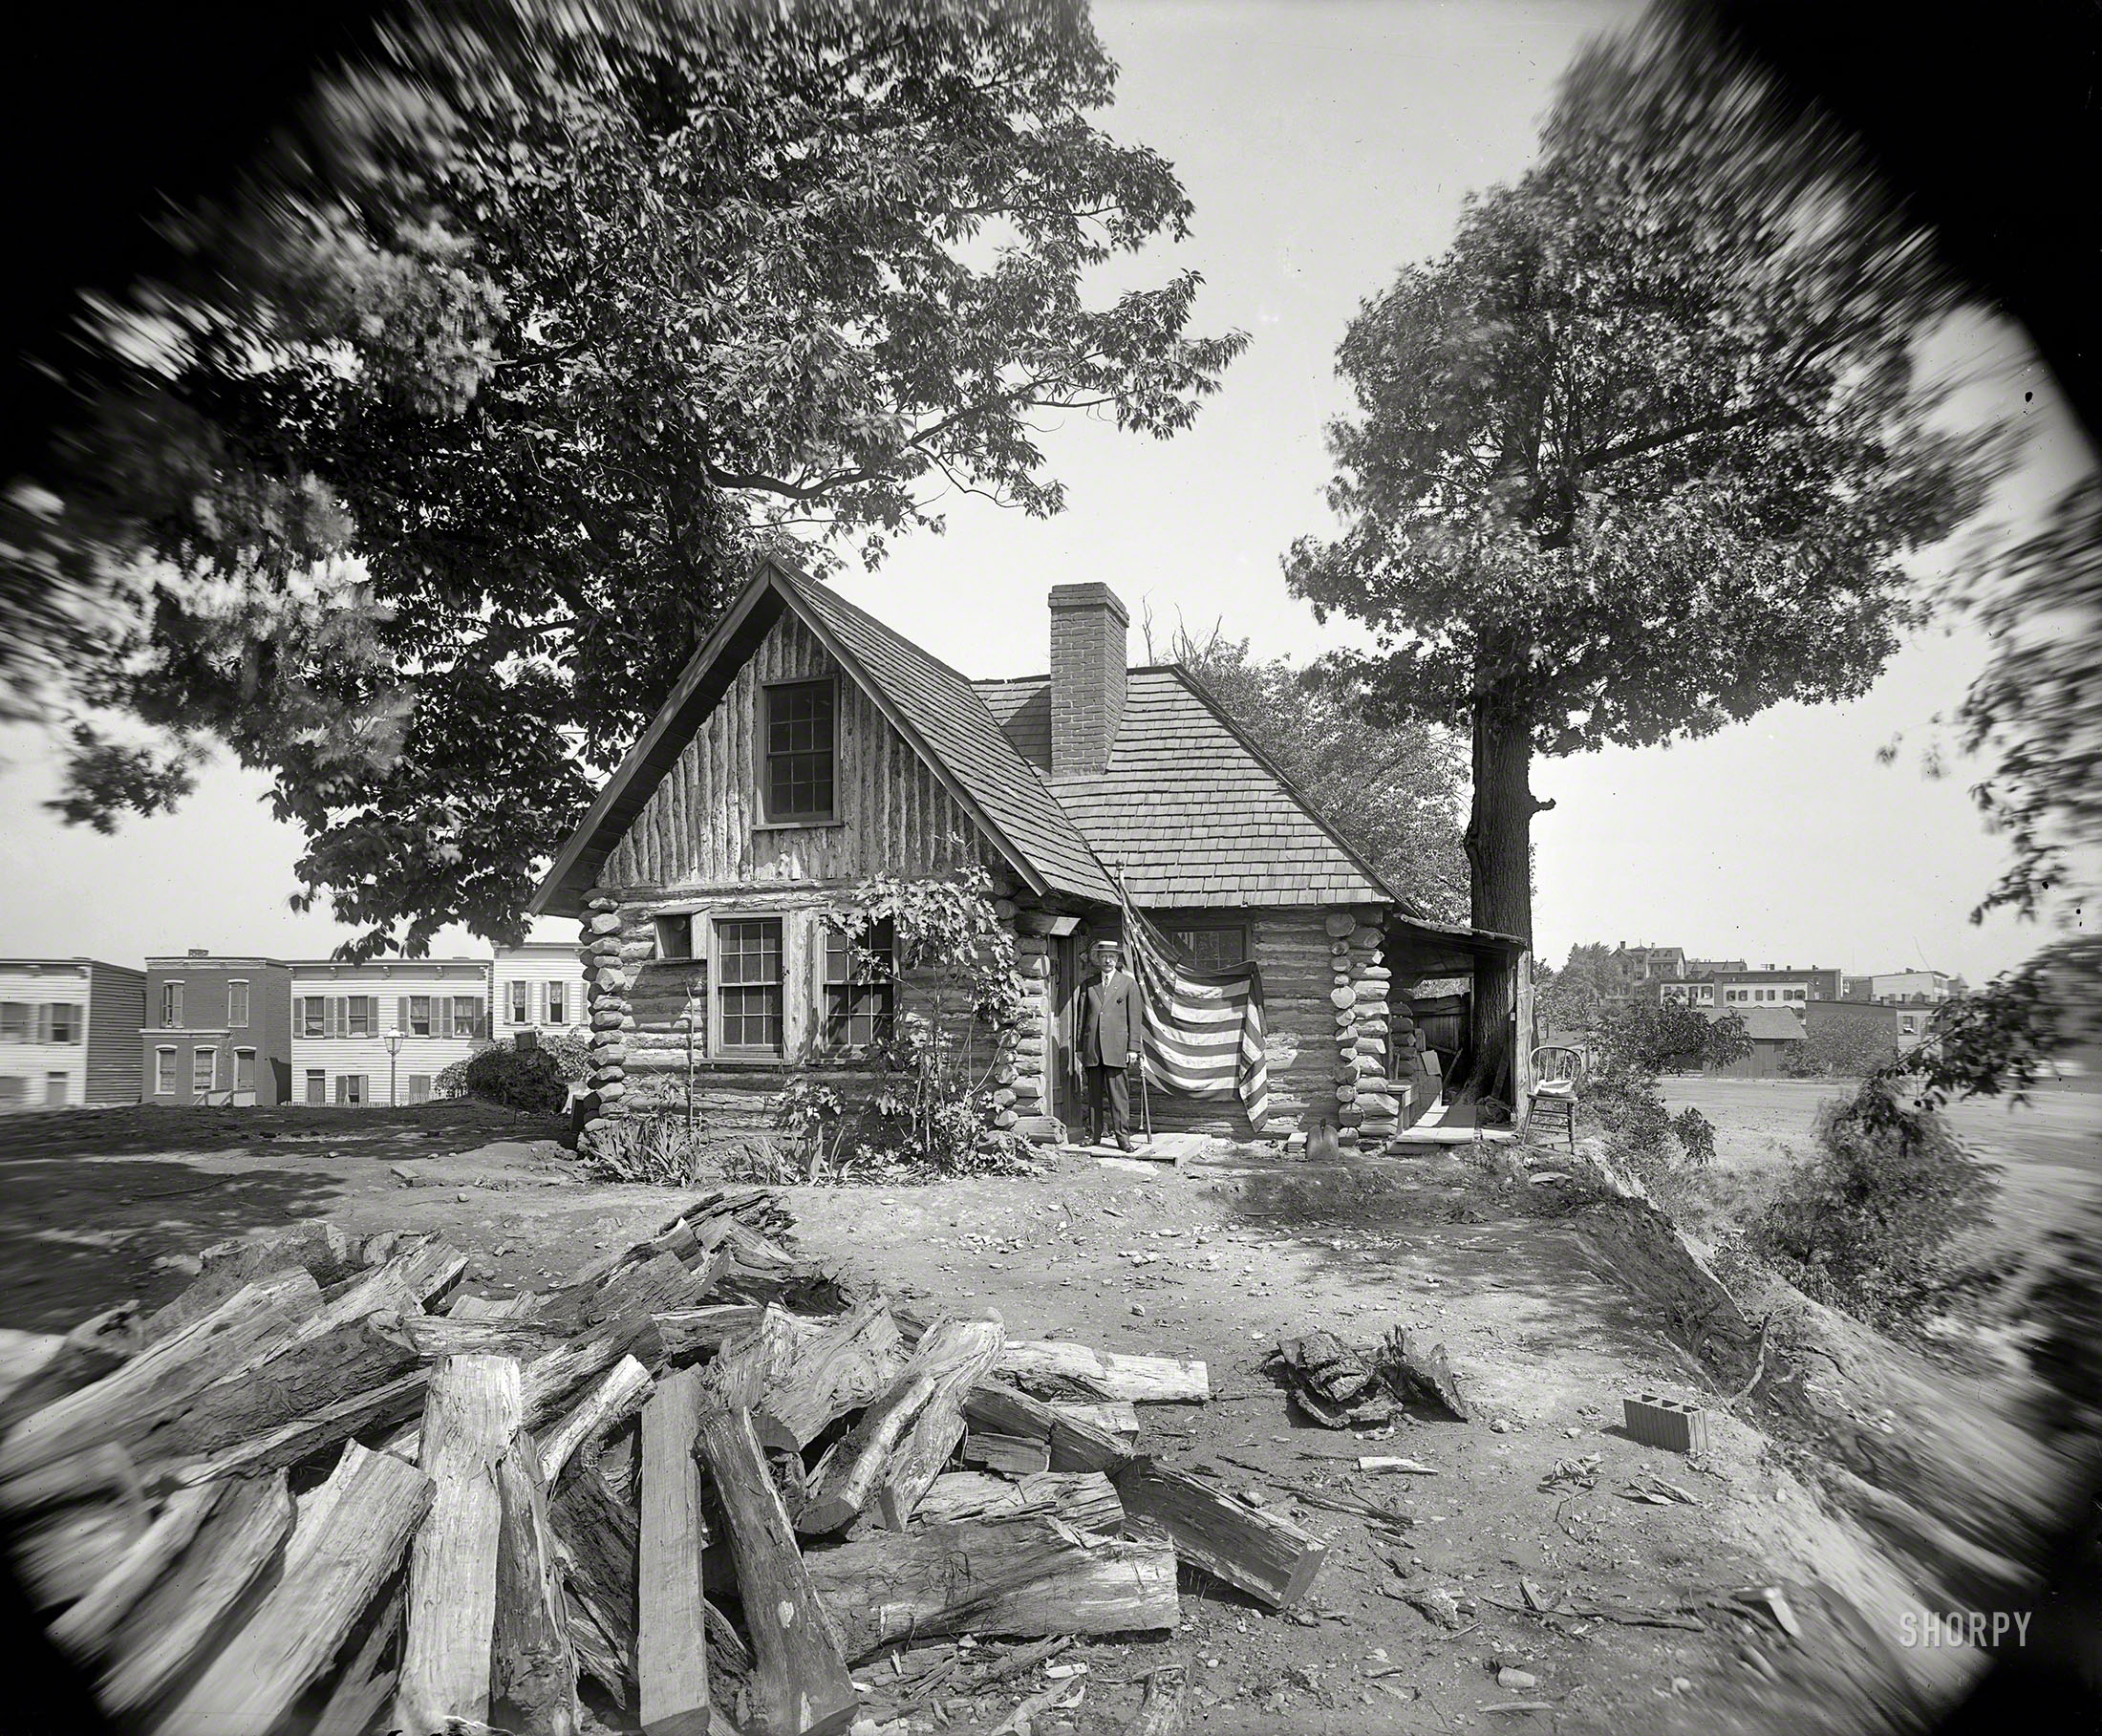 Washington, D.C., circa 1910. "Ambassador White at Poet Miller Cabin, Meridian Hill." The former home of Joaquin Miller, "Poet of the Sierras," relocated to Rock Creek Park in 1911 to make room for Henry White's mansion. View full size.